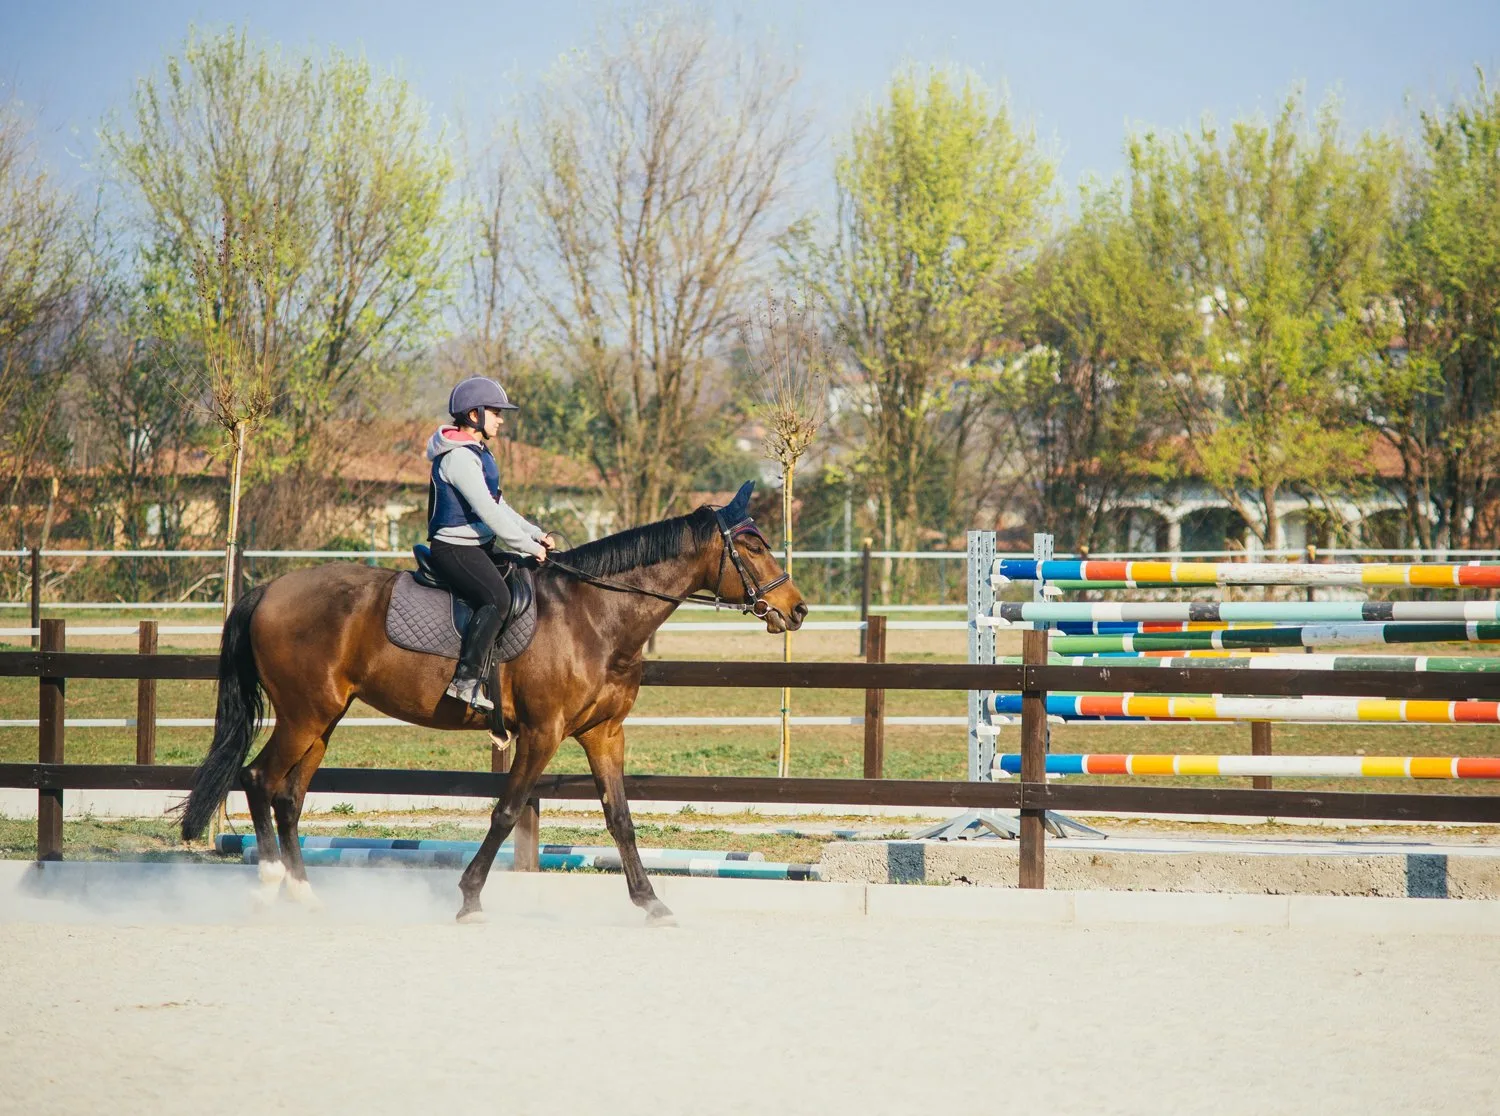 A photo of a person riding a horse in a riding lesson.